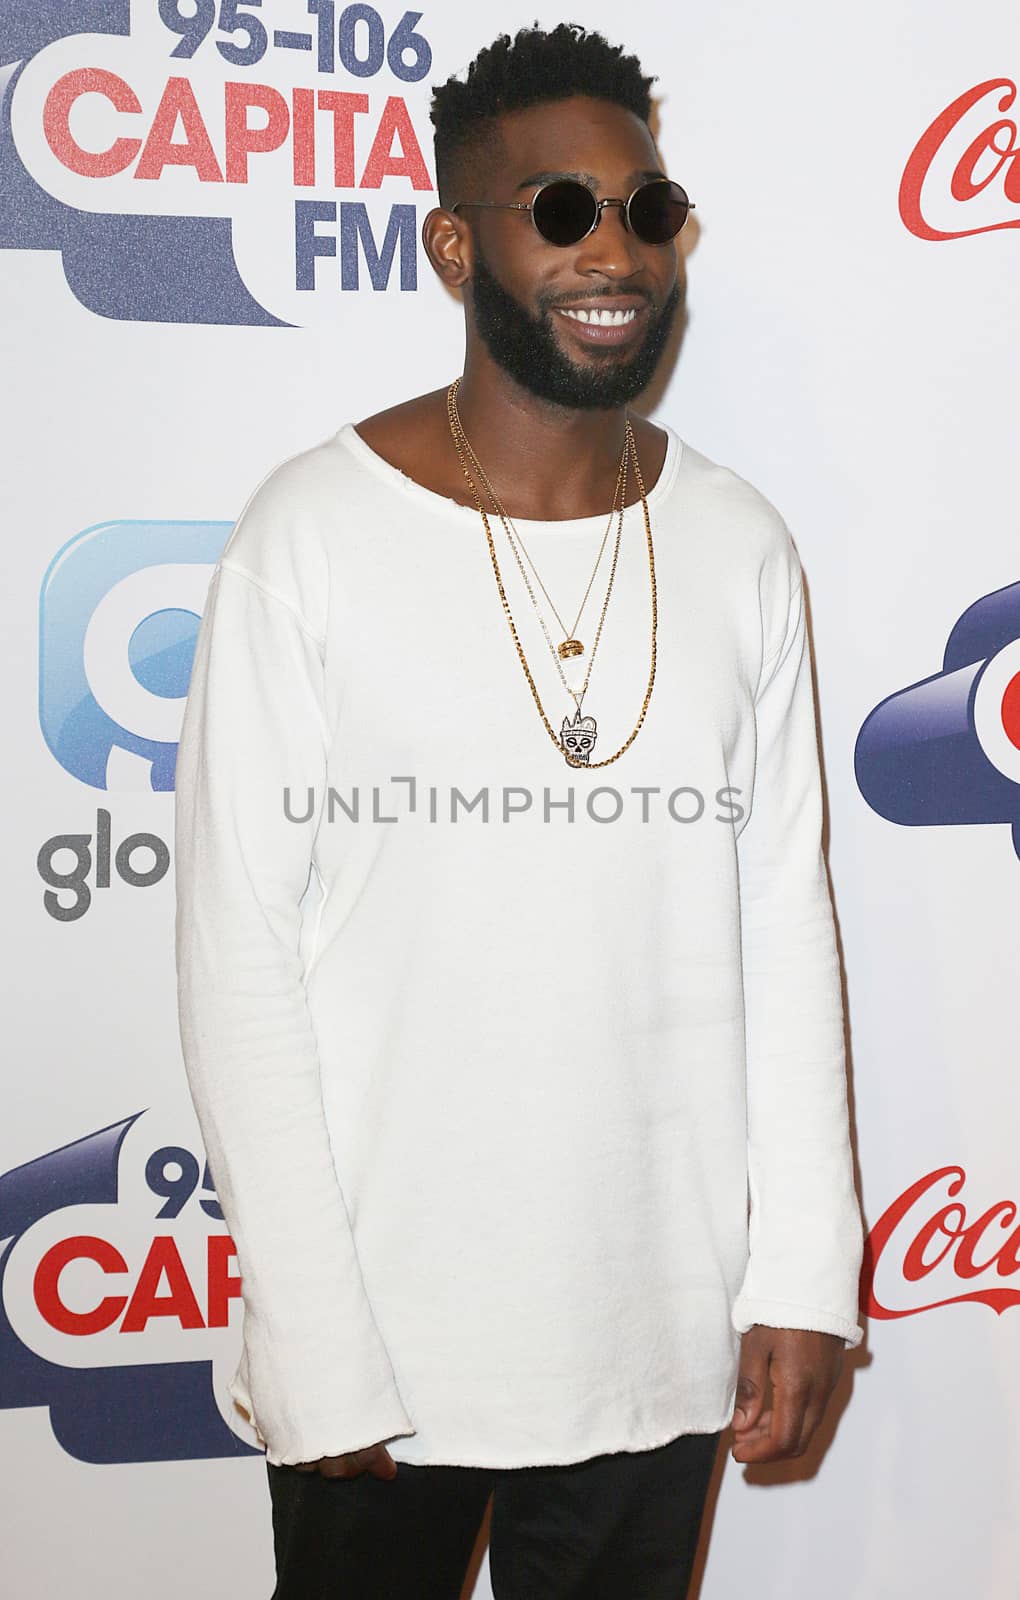 UNITED KINGDOM, London: Tinie Tempah arrives to the O2 stadium ahead of Capital's Jingle Bell Ball on December 5, 2015.  The event shares a portion of the ticket sales profit with Global's Make Some Noise charity.  Stars in the photos include: David Guetta, F leur East, Jason Derulo,  Katy B, Marvin Humes, Nathan Sykes, Tinie Tempah, WSTRN, and Years and Years.      